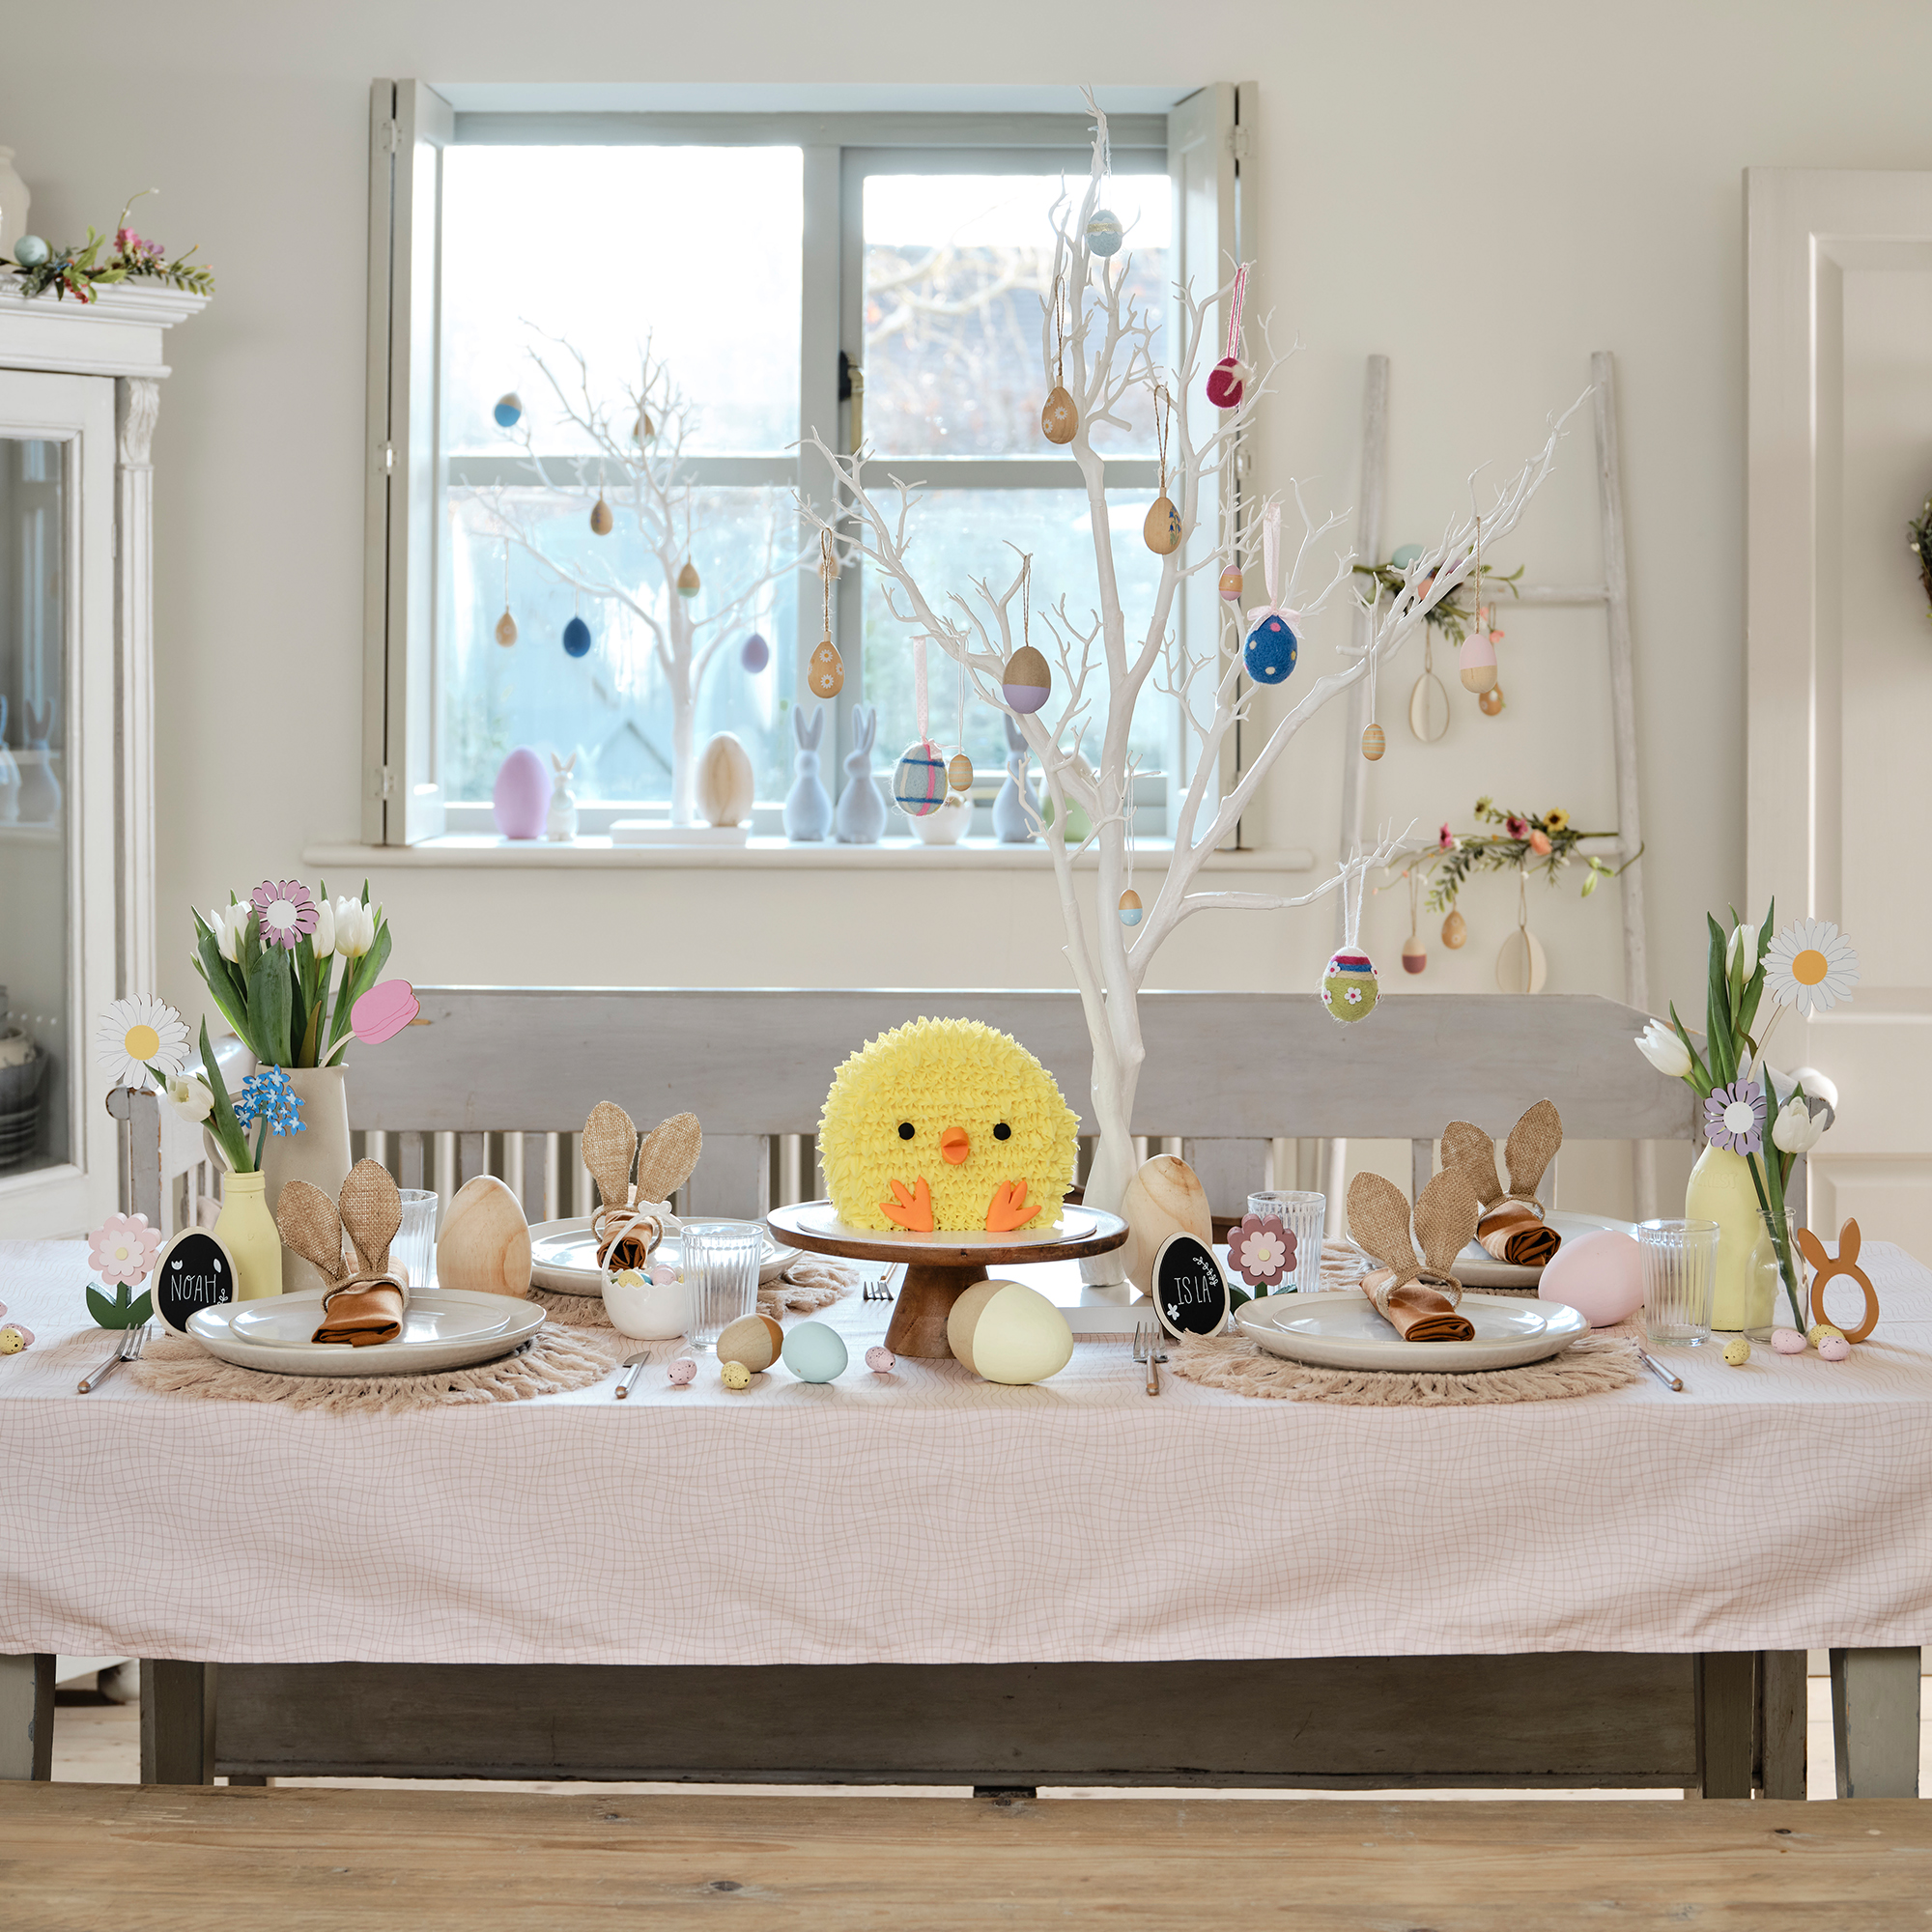 5 Simple & Fun Easter Decor Ideas - The Ginger Home